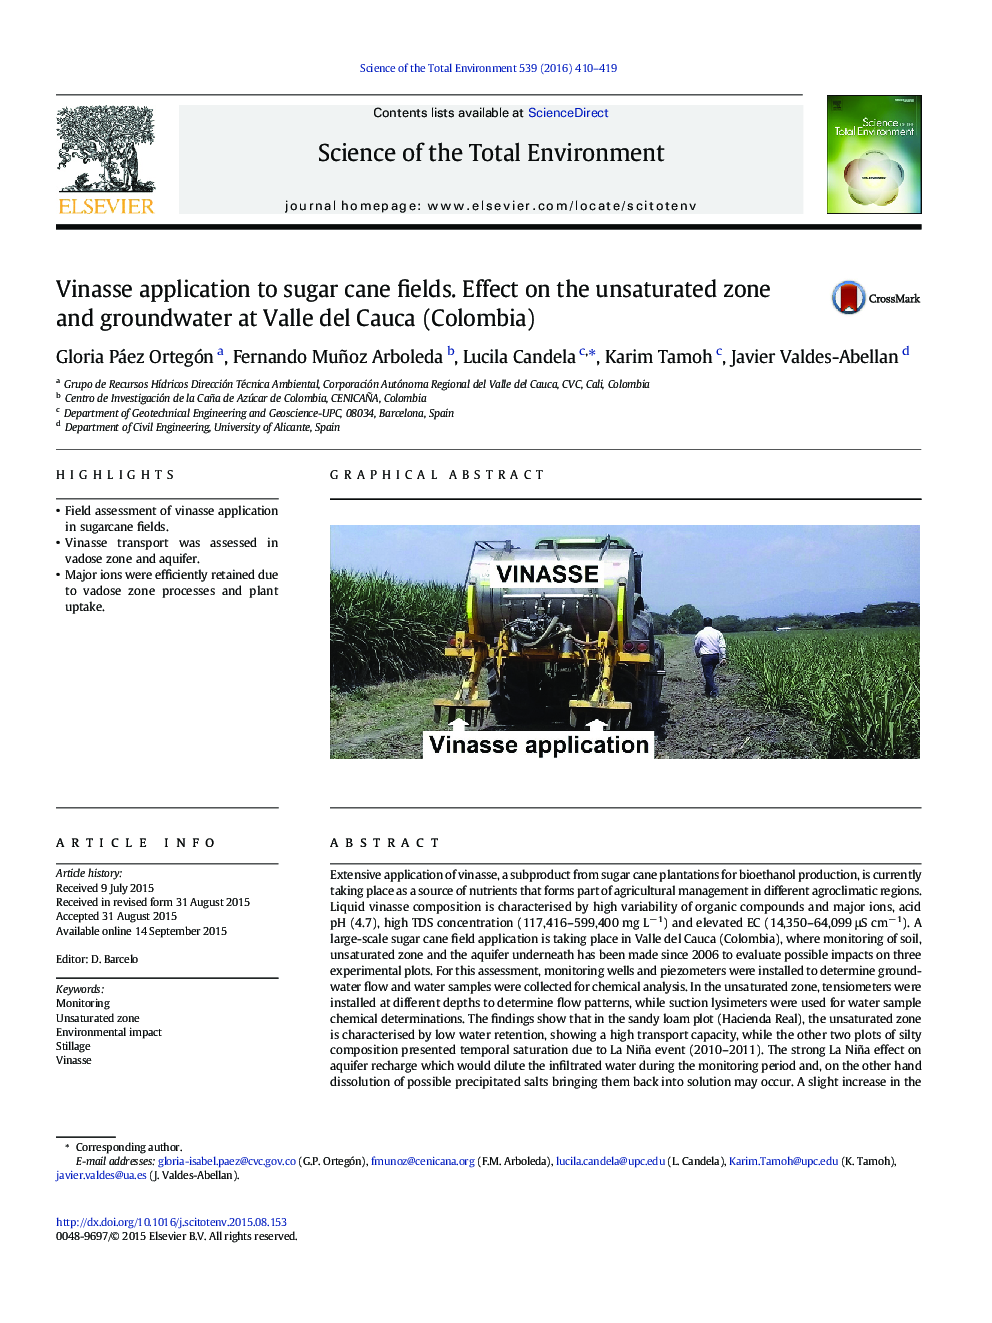 Vinasse application to sugar cane fields. Effect on the unsaturated zone and groundwater at Valle del Cauca (Colombia)